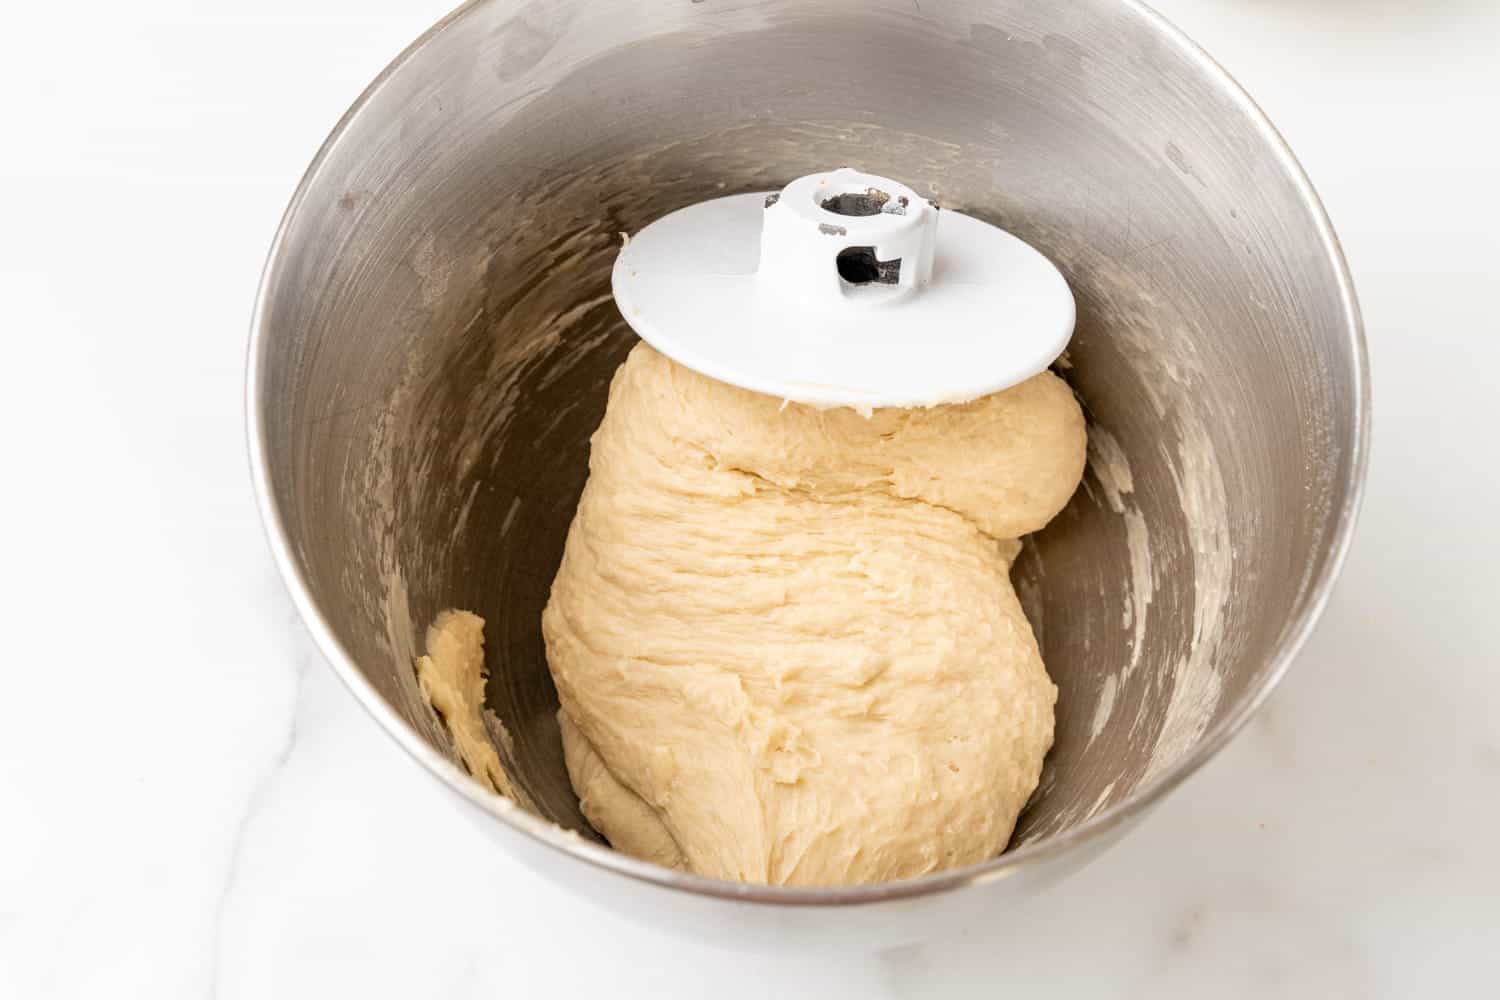 Kneaded dough in a metal bowl with the dough attachment